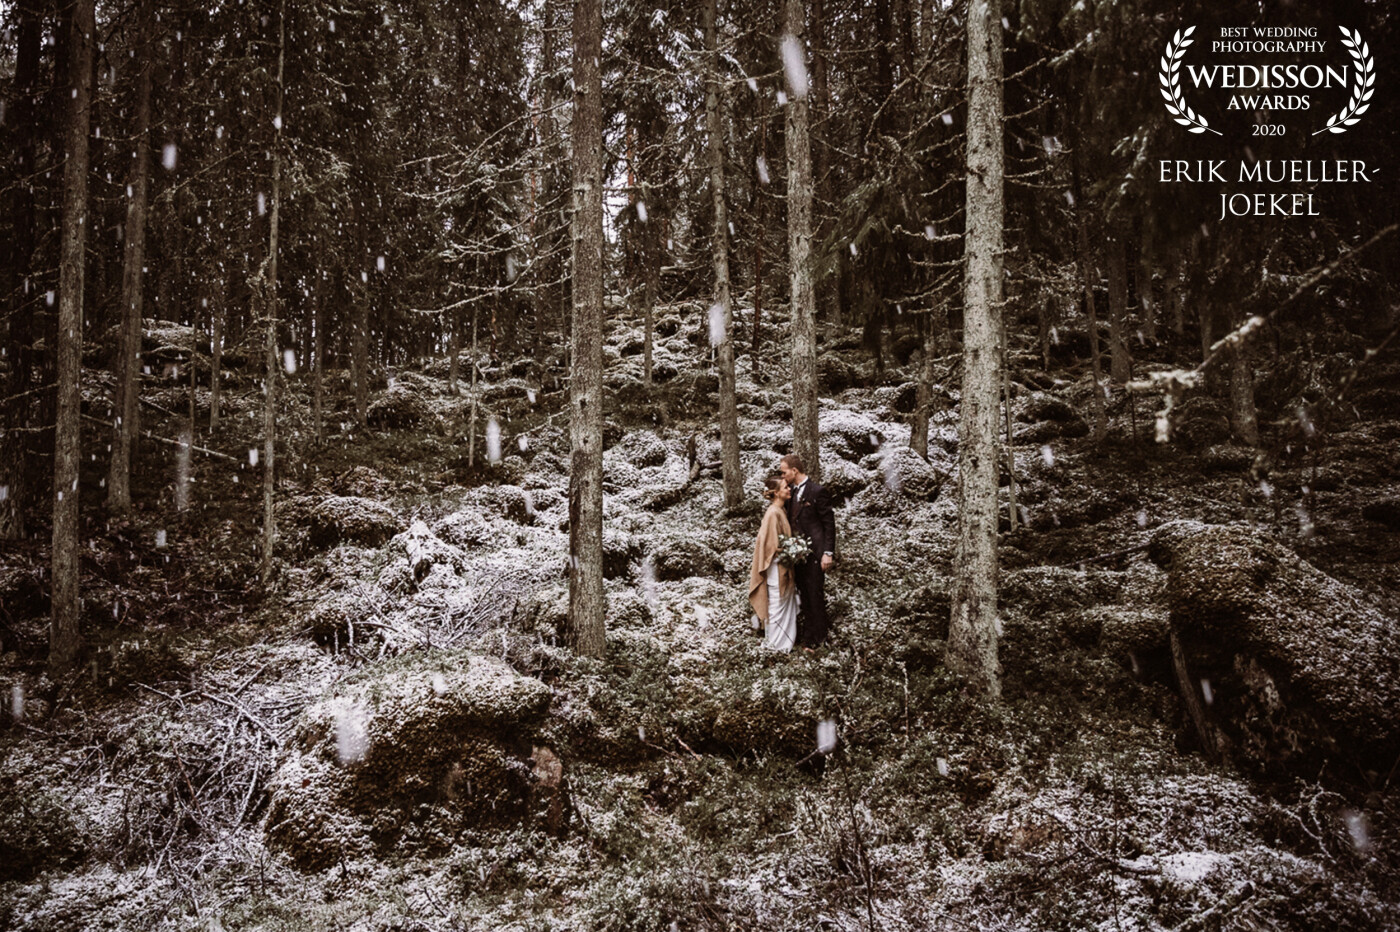 It was raining all day in Finland. But after the wedding, the rain turned into snow and the bride and groom walked fearlessly through the wet moss in the forest. It was a magical wedding photo session in the Finnish woods.